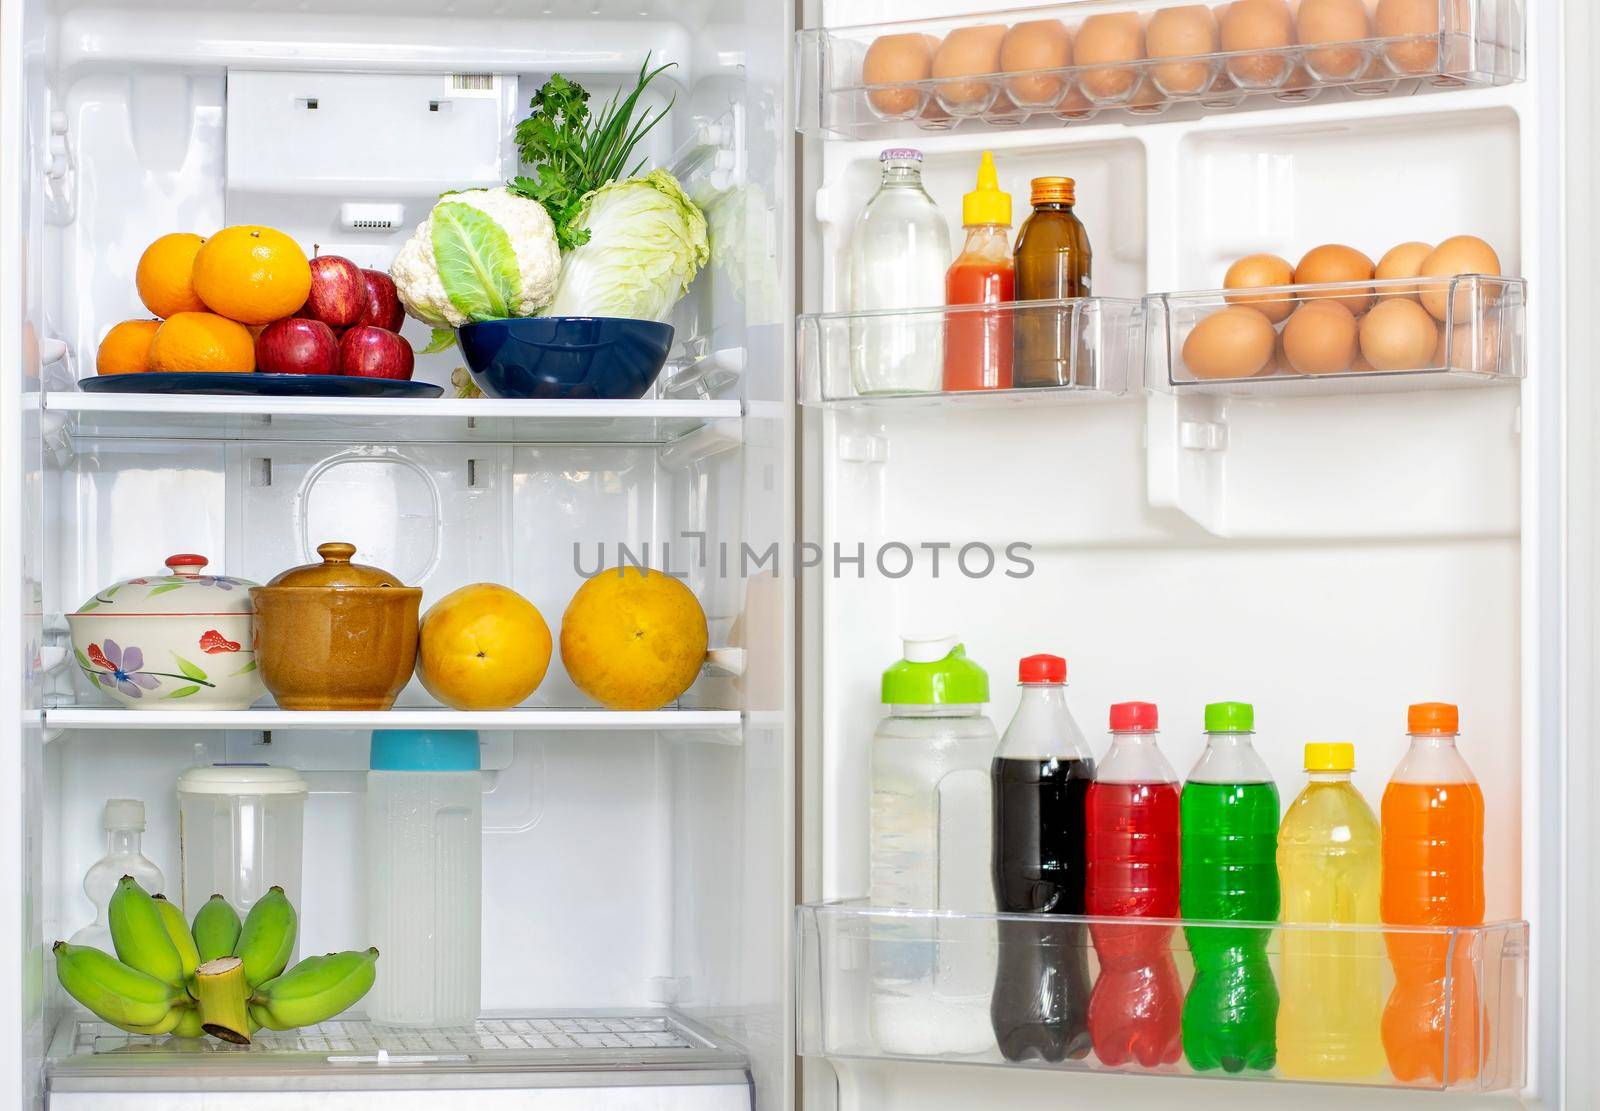 Look into the refrigerator with the lid open a lots of fresh food and drinks inside.